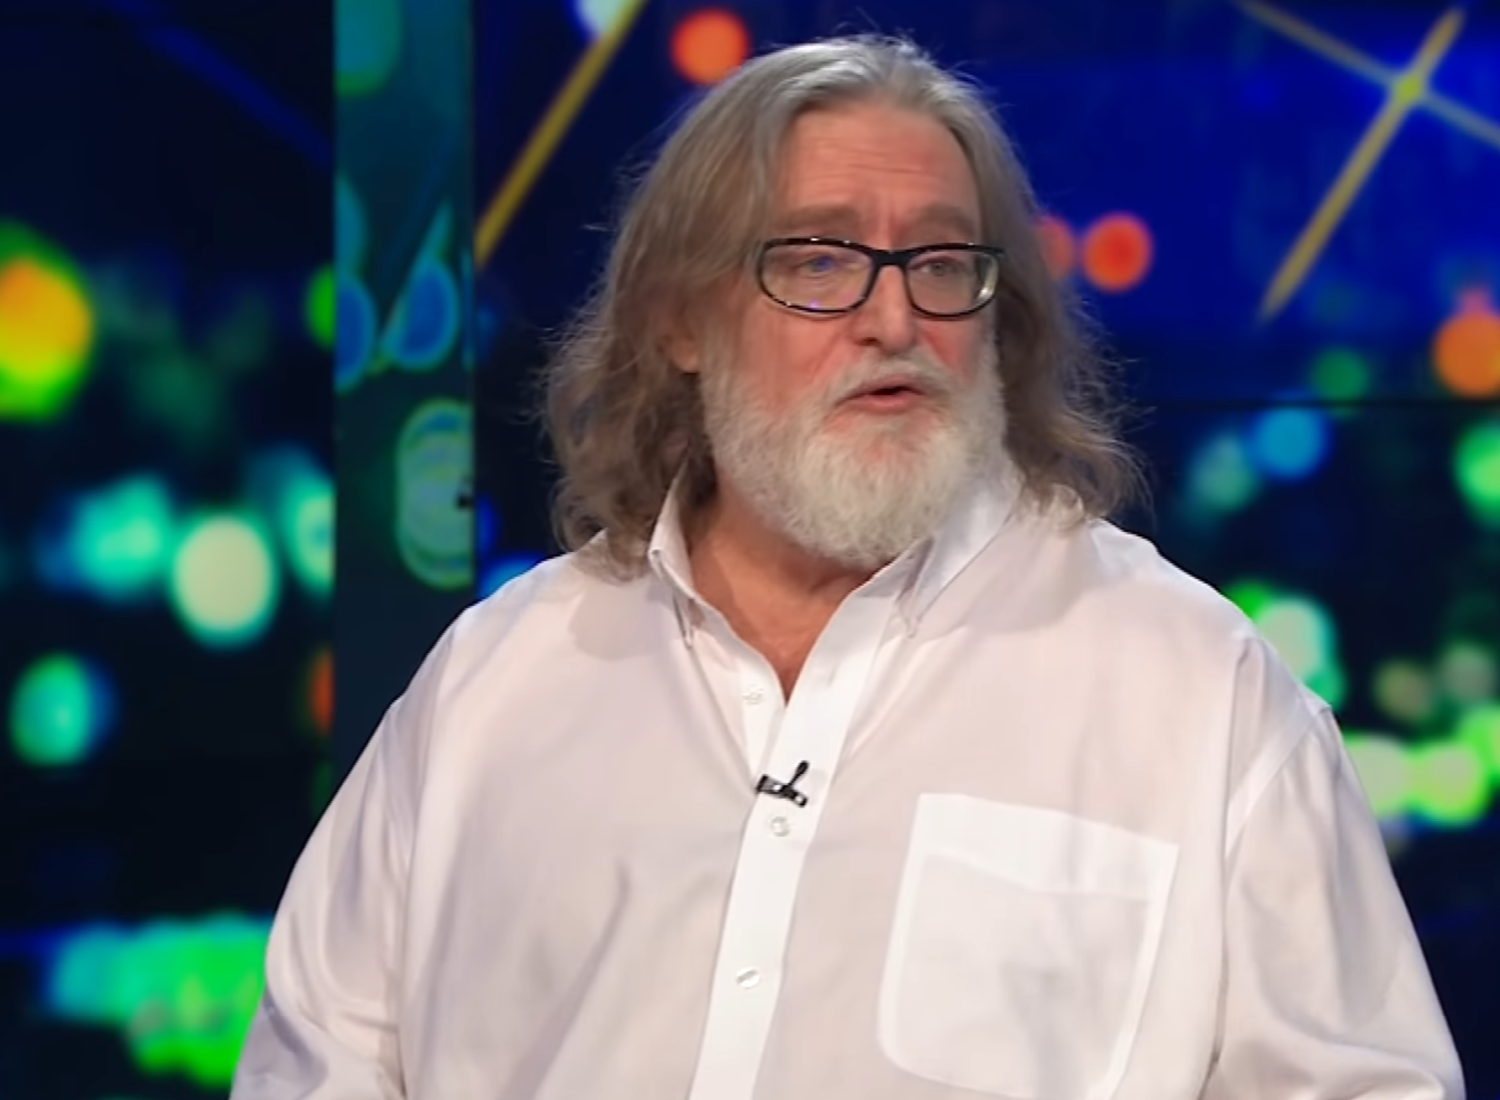 Valve's Gabe Newell improves Microsoft's chances in closing Activision